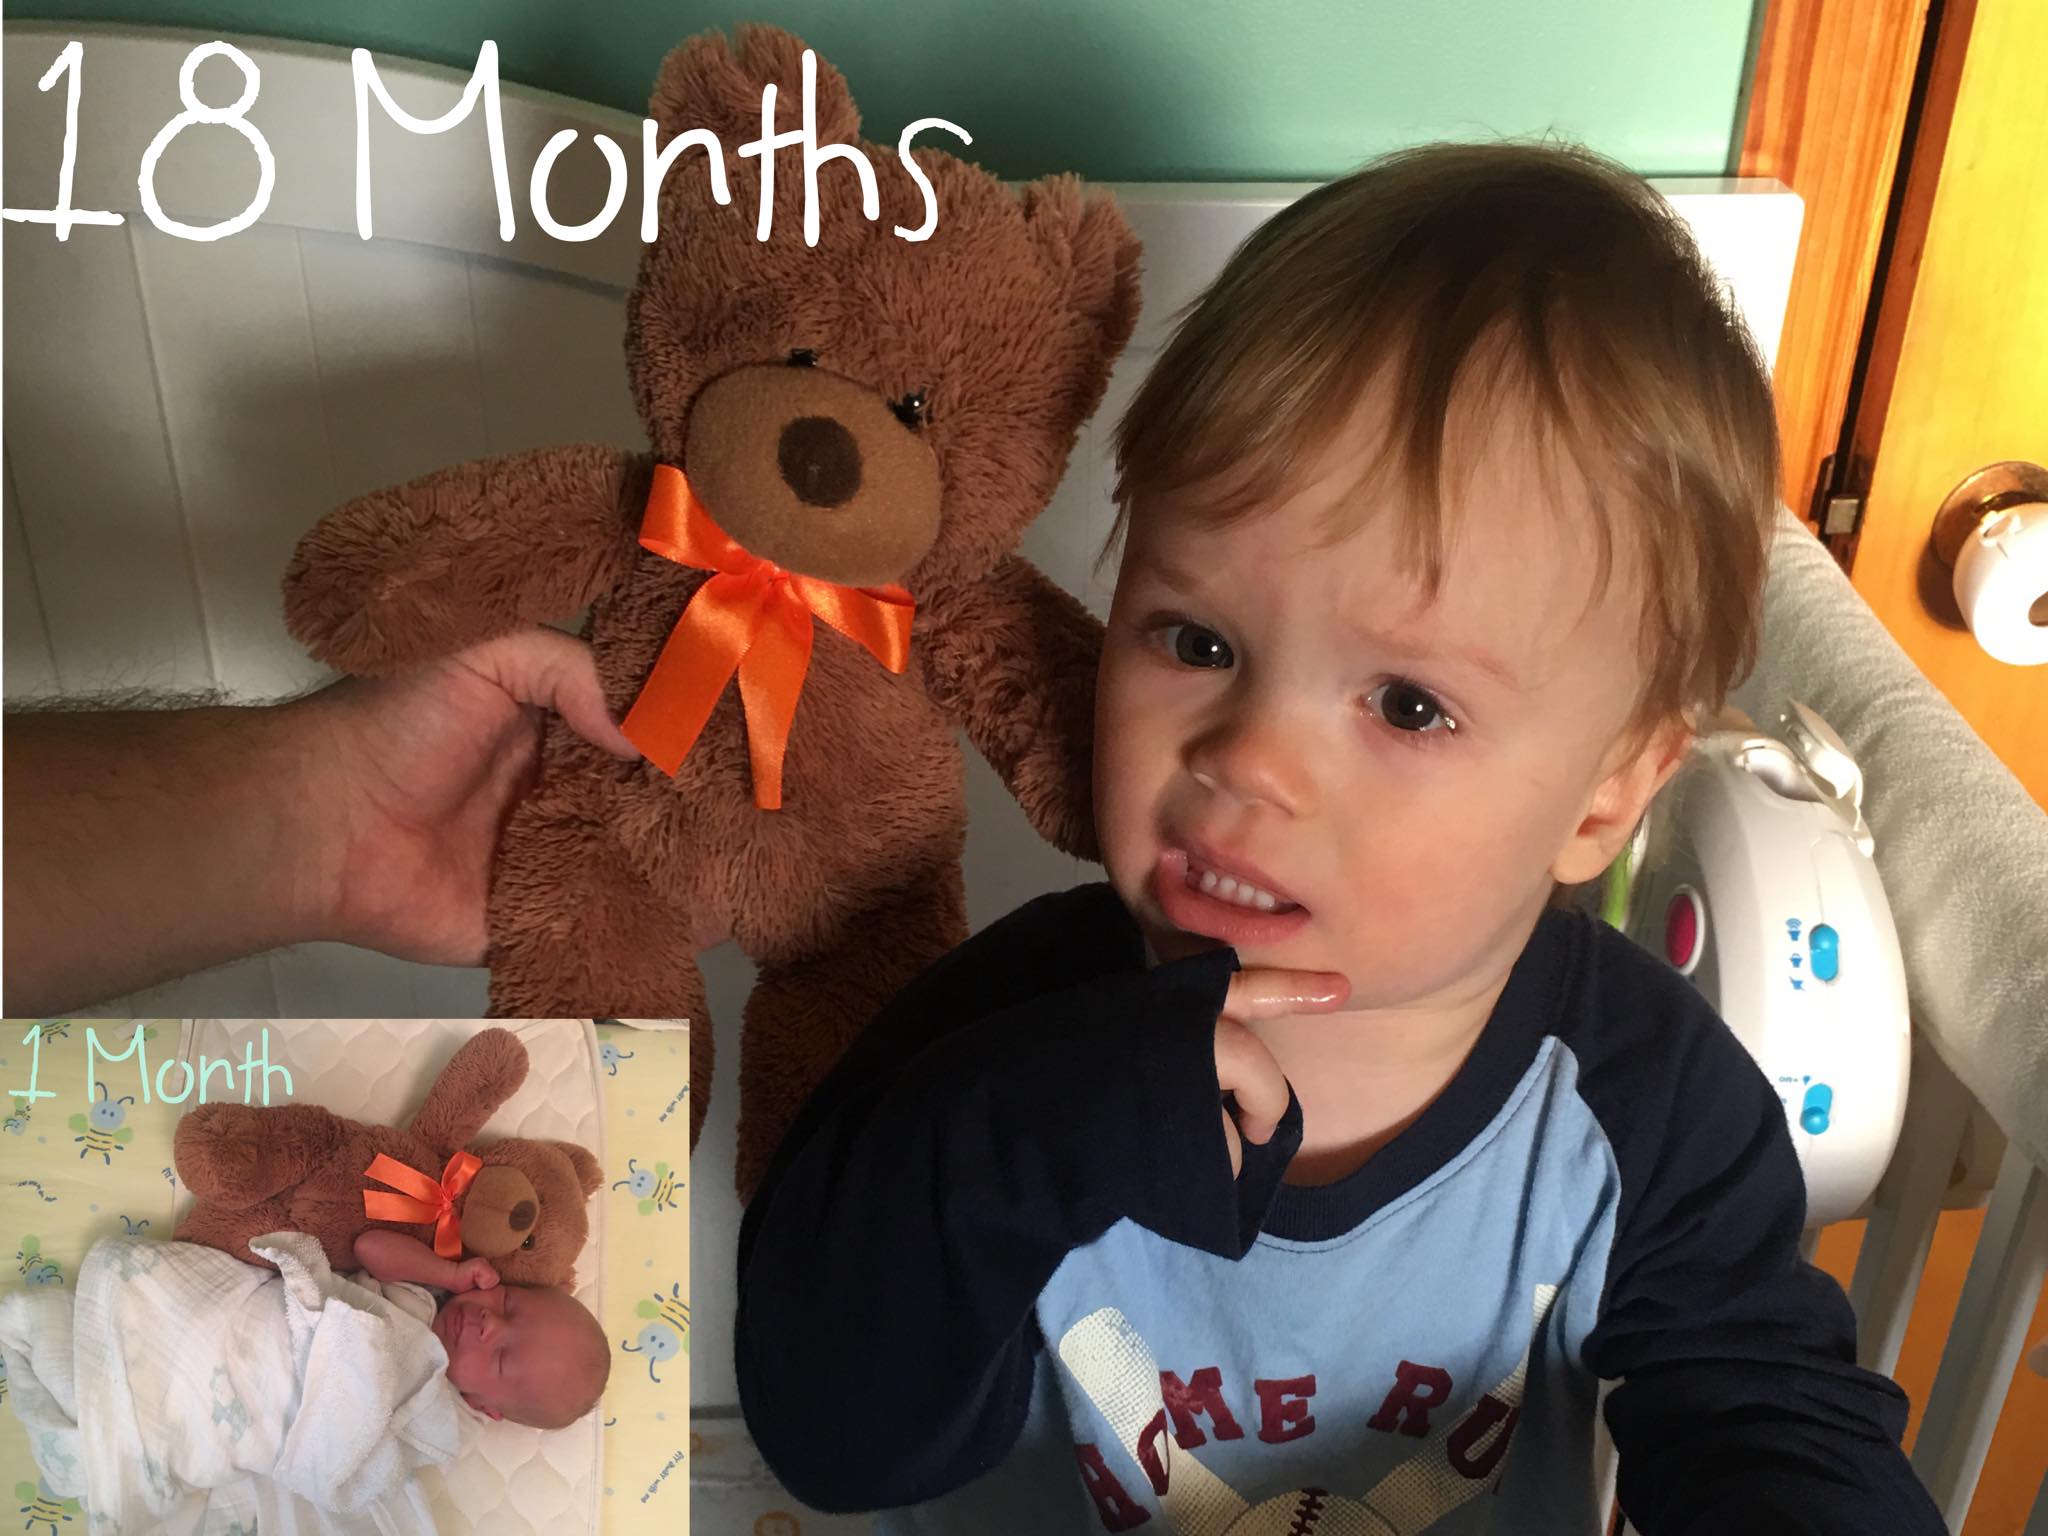 Asher is 18 months old